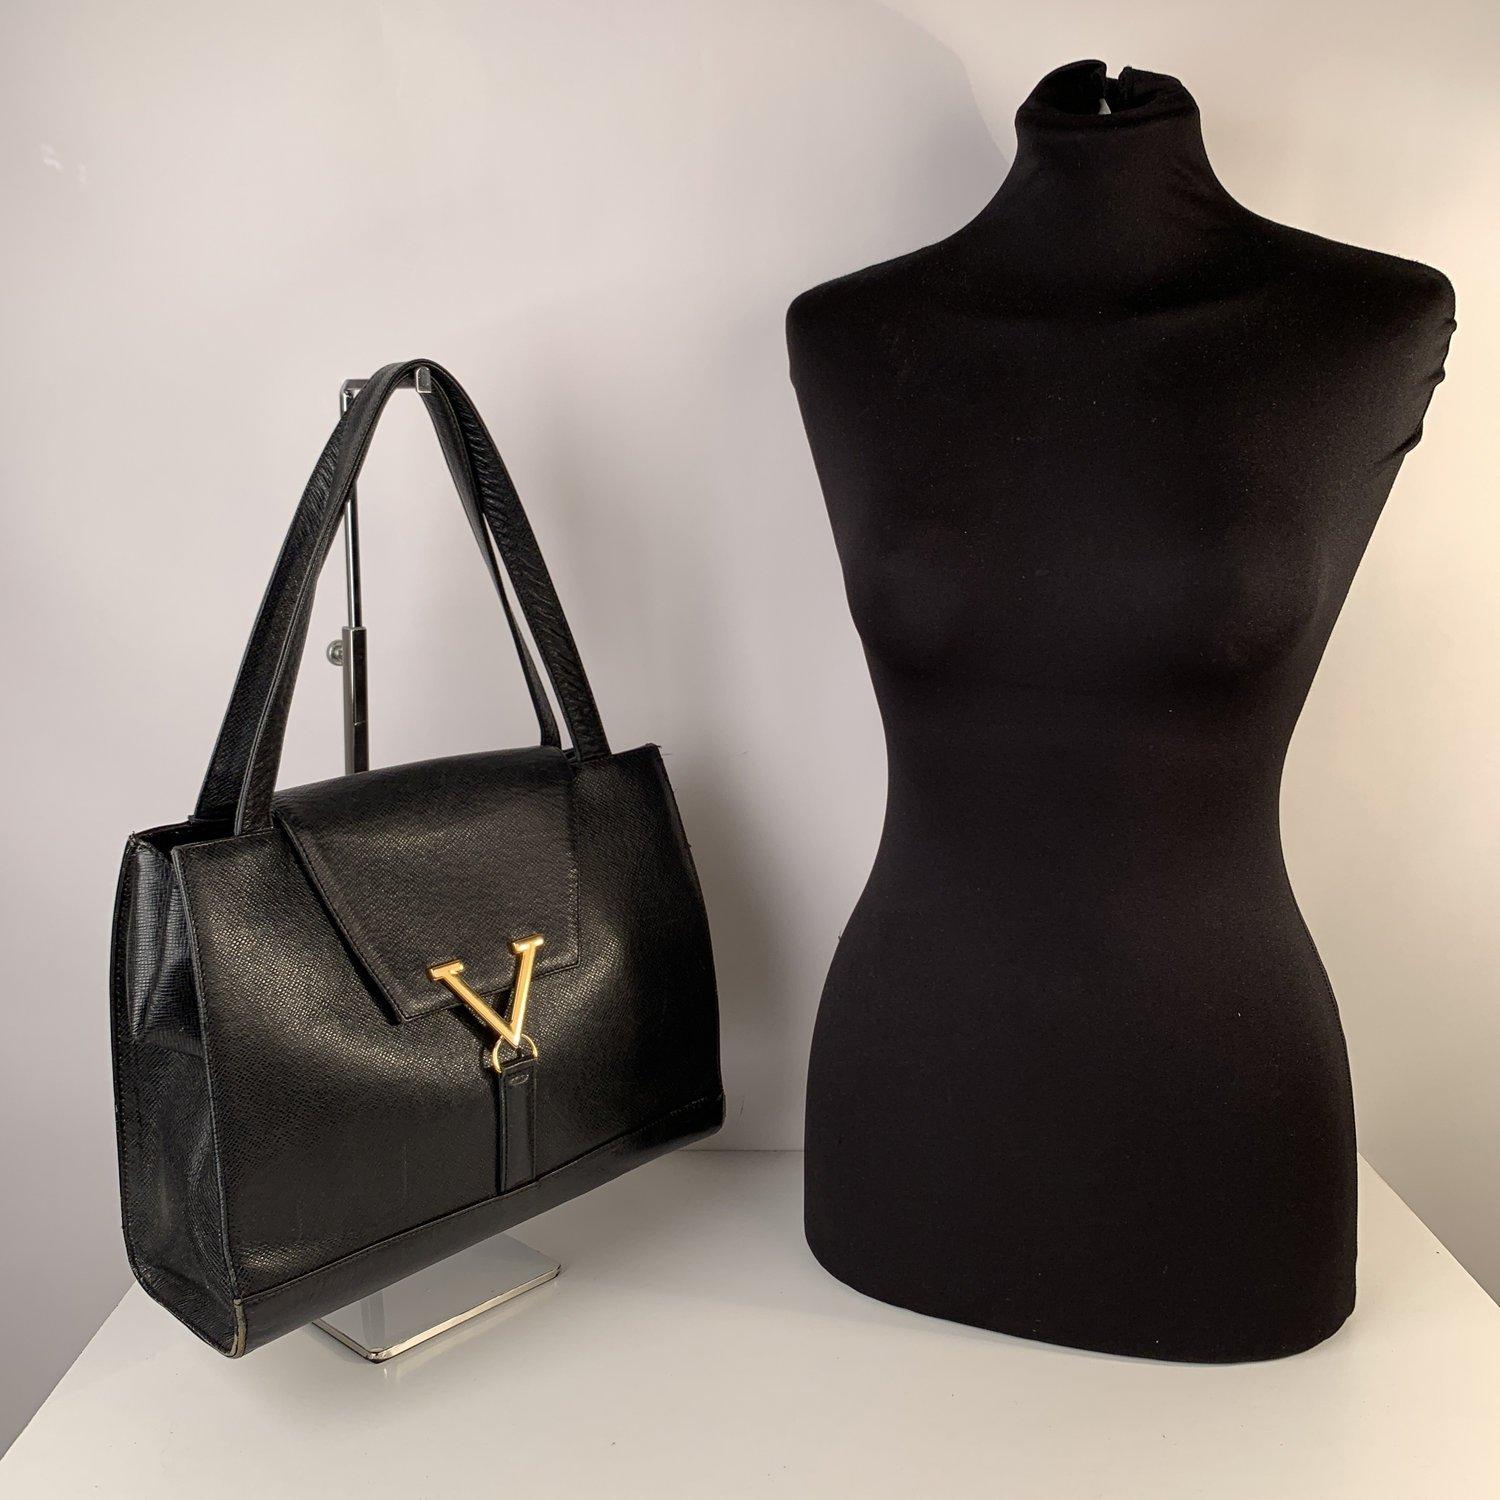 MATERIAL: Leather COLOR: Black MODEL: Satchel GENDER: Women SIZE: Medium Condition Some scratches on leather due to normal use, some wear of use on bottom corners. Measurements BAG HEIGHT: 9.5 inches - 24,2 cm BAG LENGTH: 12.5 inches - 31,7 cm BAG